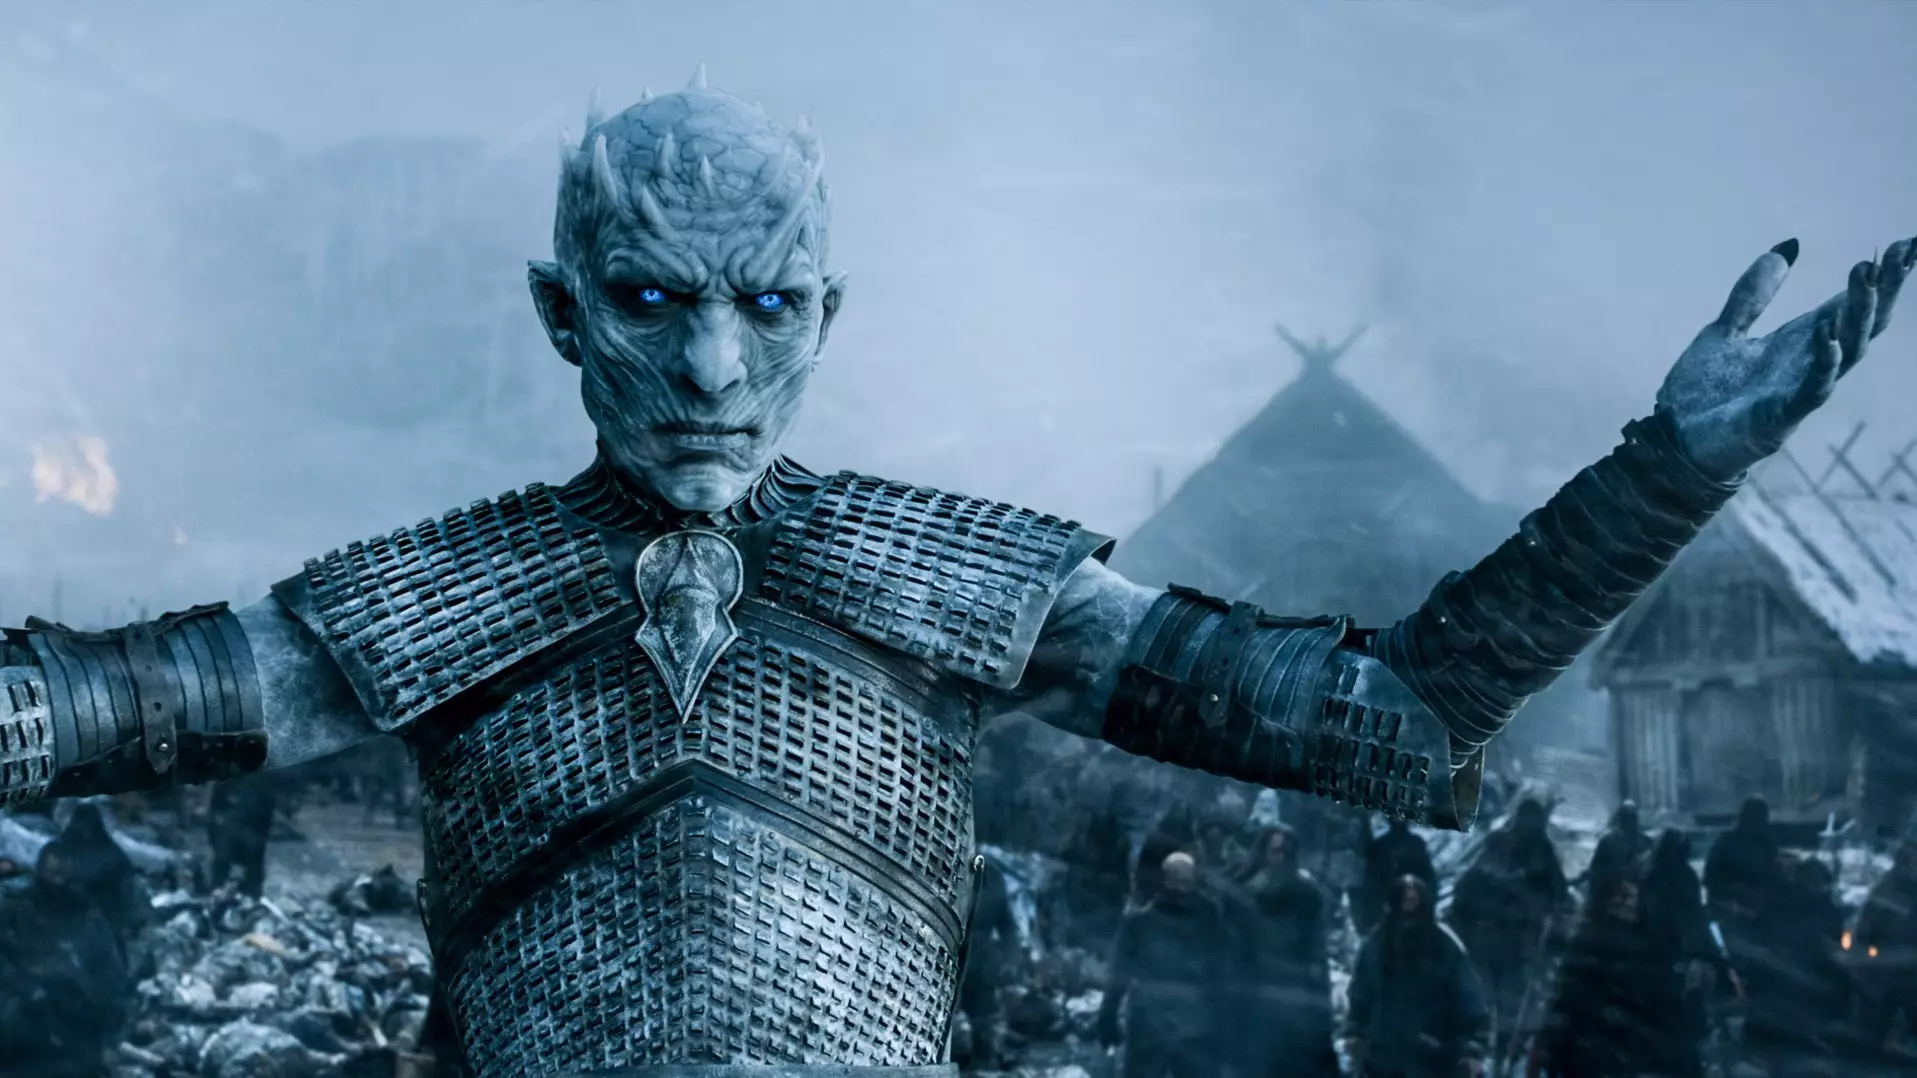 Hackers Steal Script For Upcoming ‘Game Of Thrones’ Episode From HBO